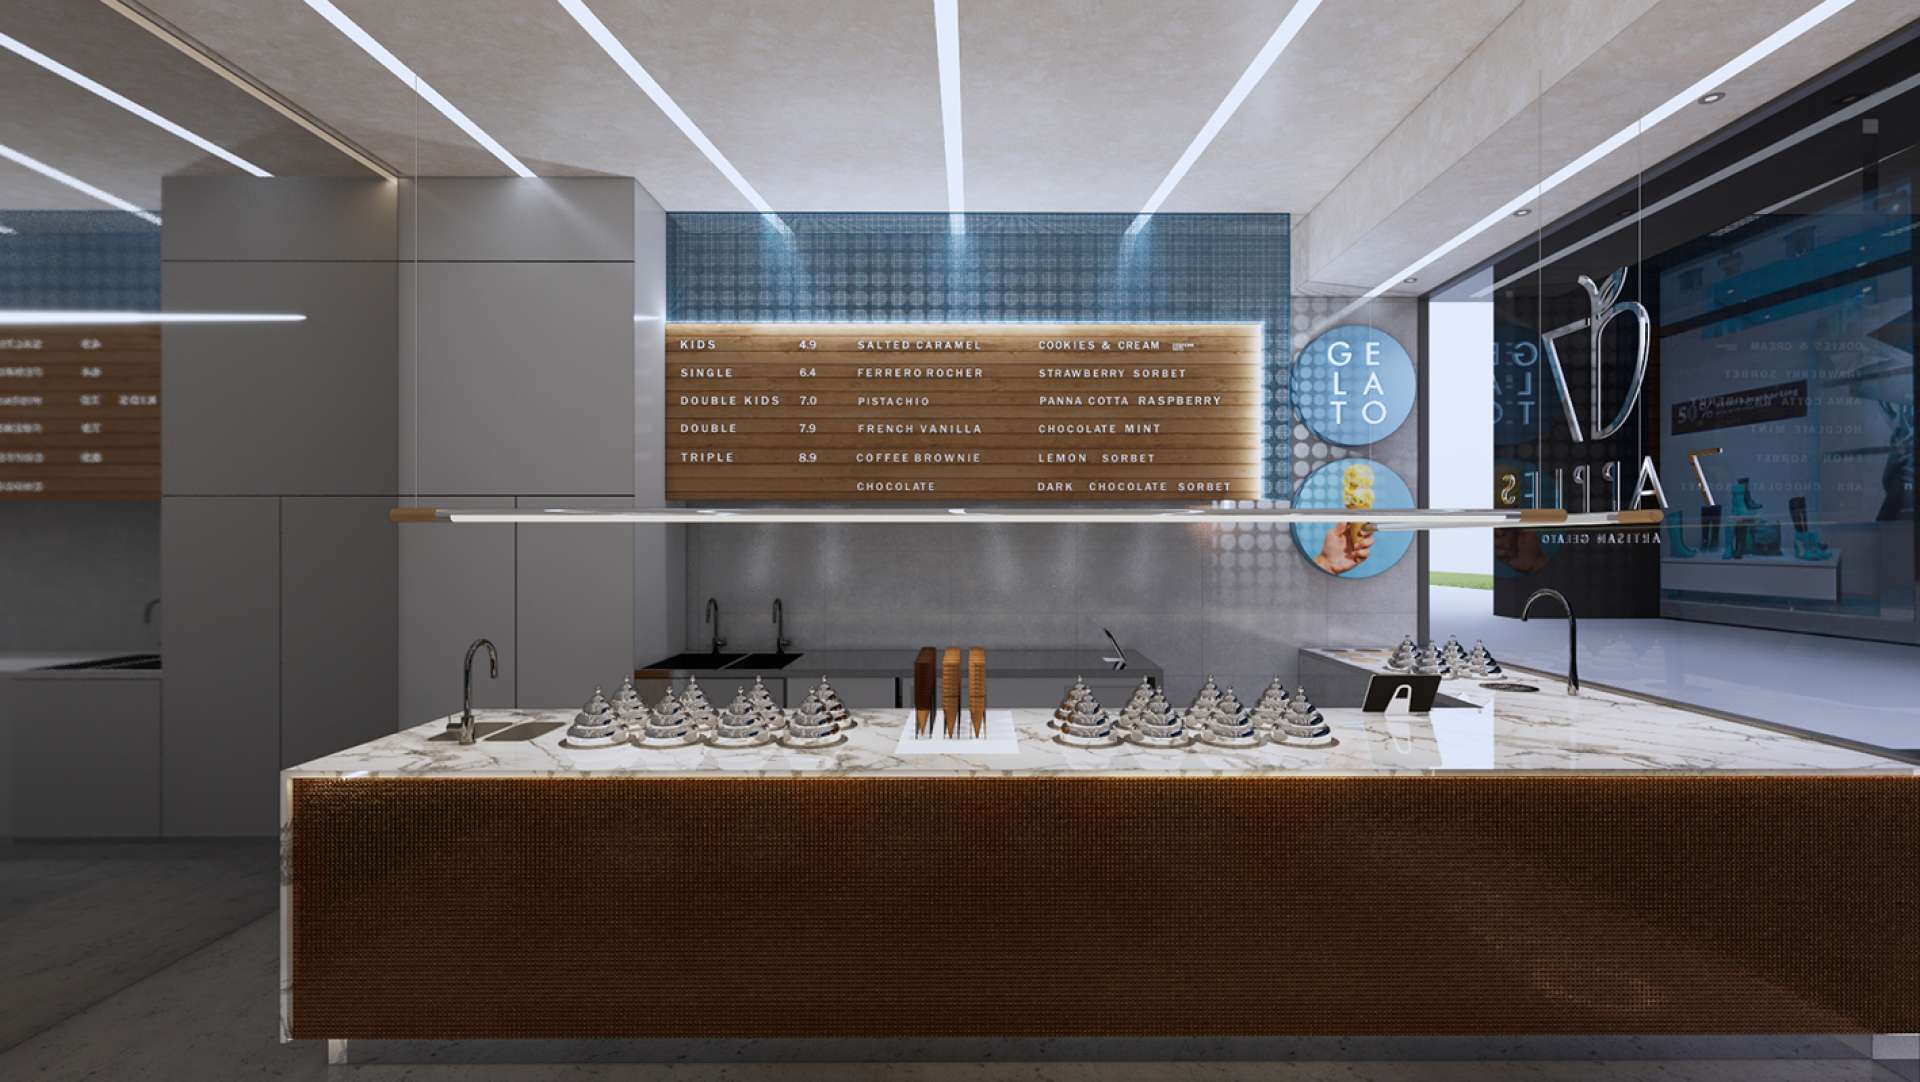 7 Apples Gelato to Launch New Store Design by Studio Equator